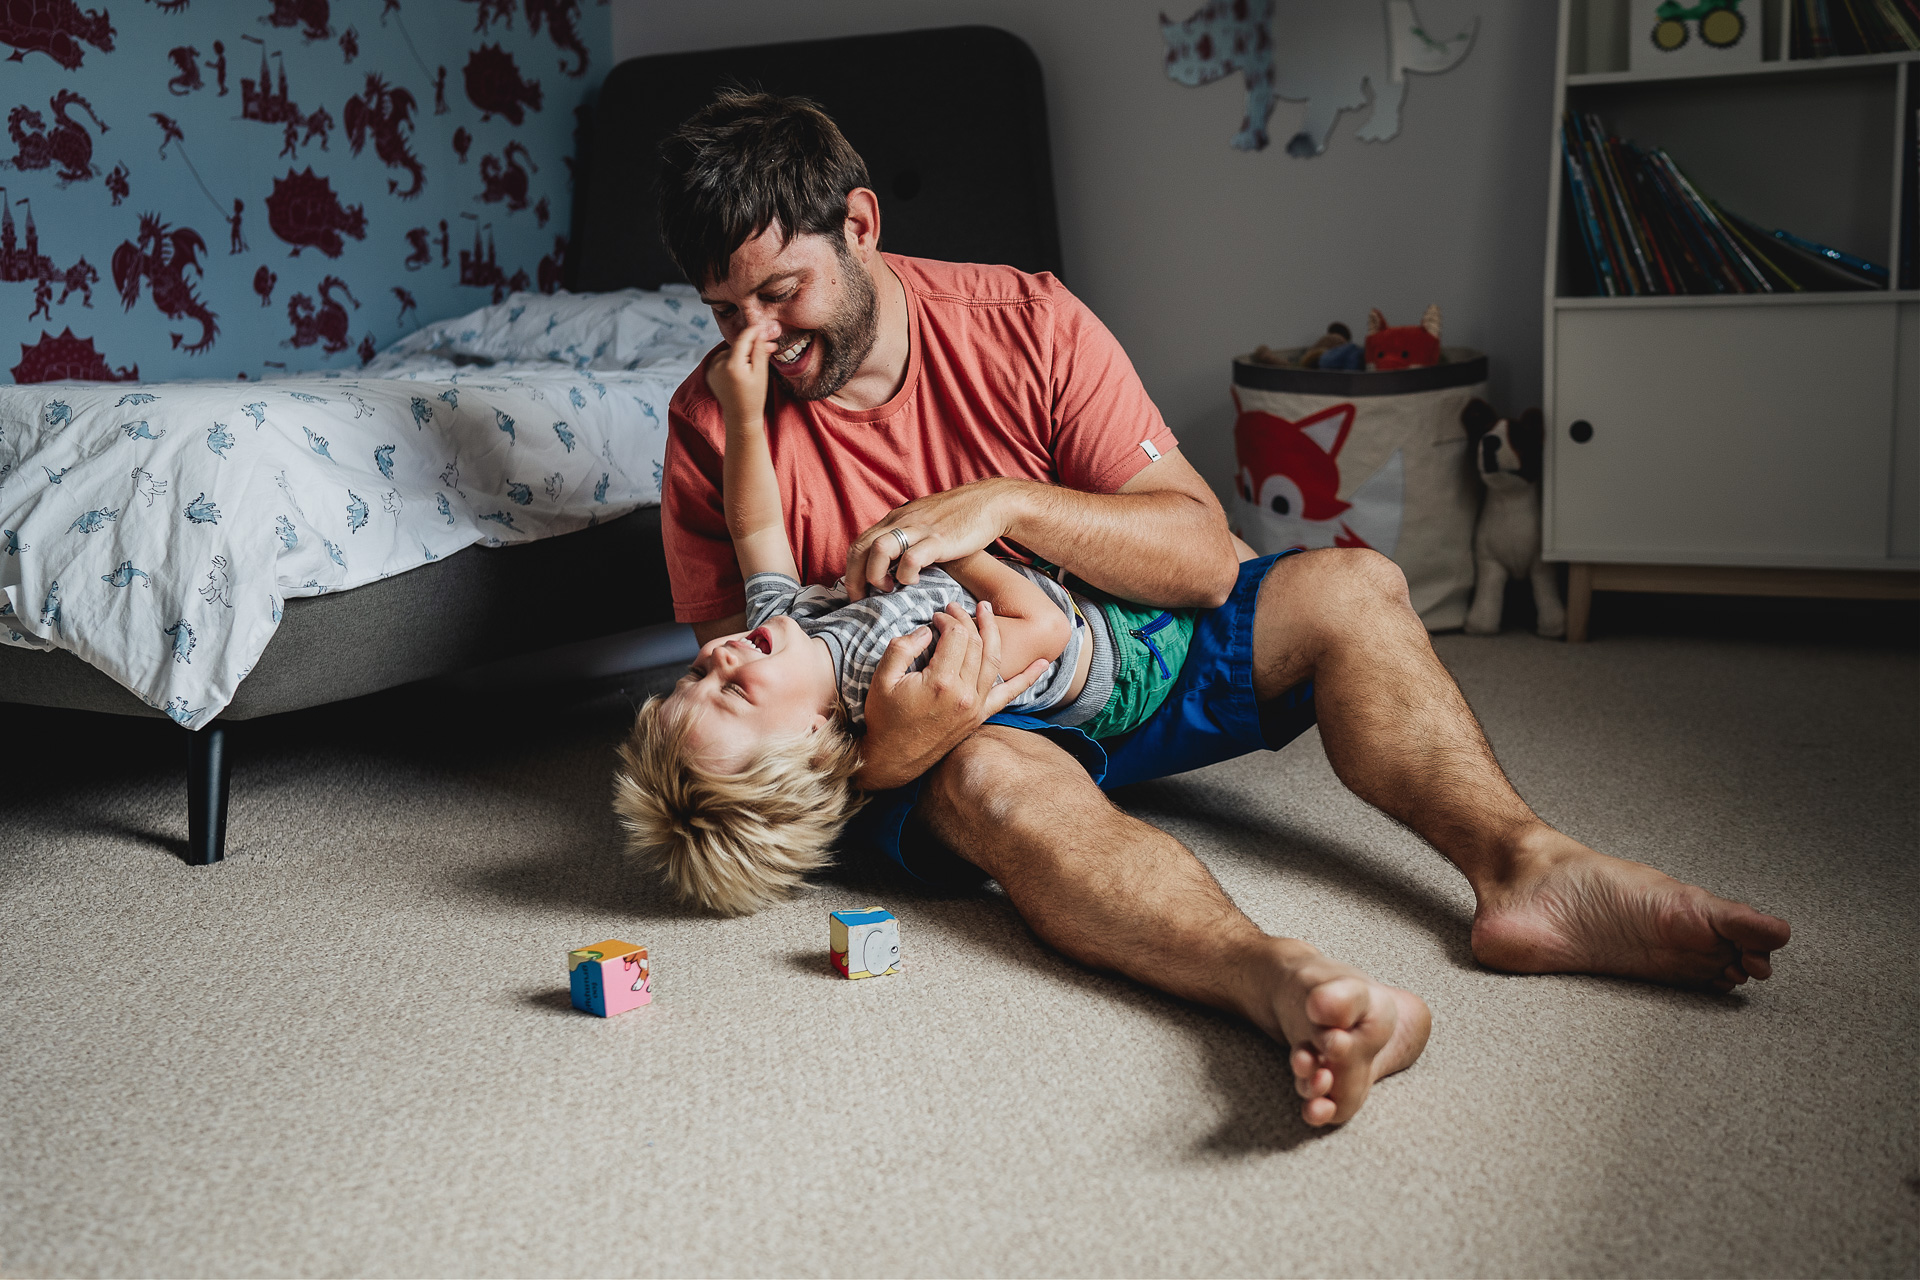 Family photography at home, a father and son playing in a bedroom